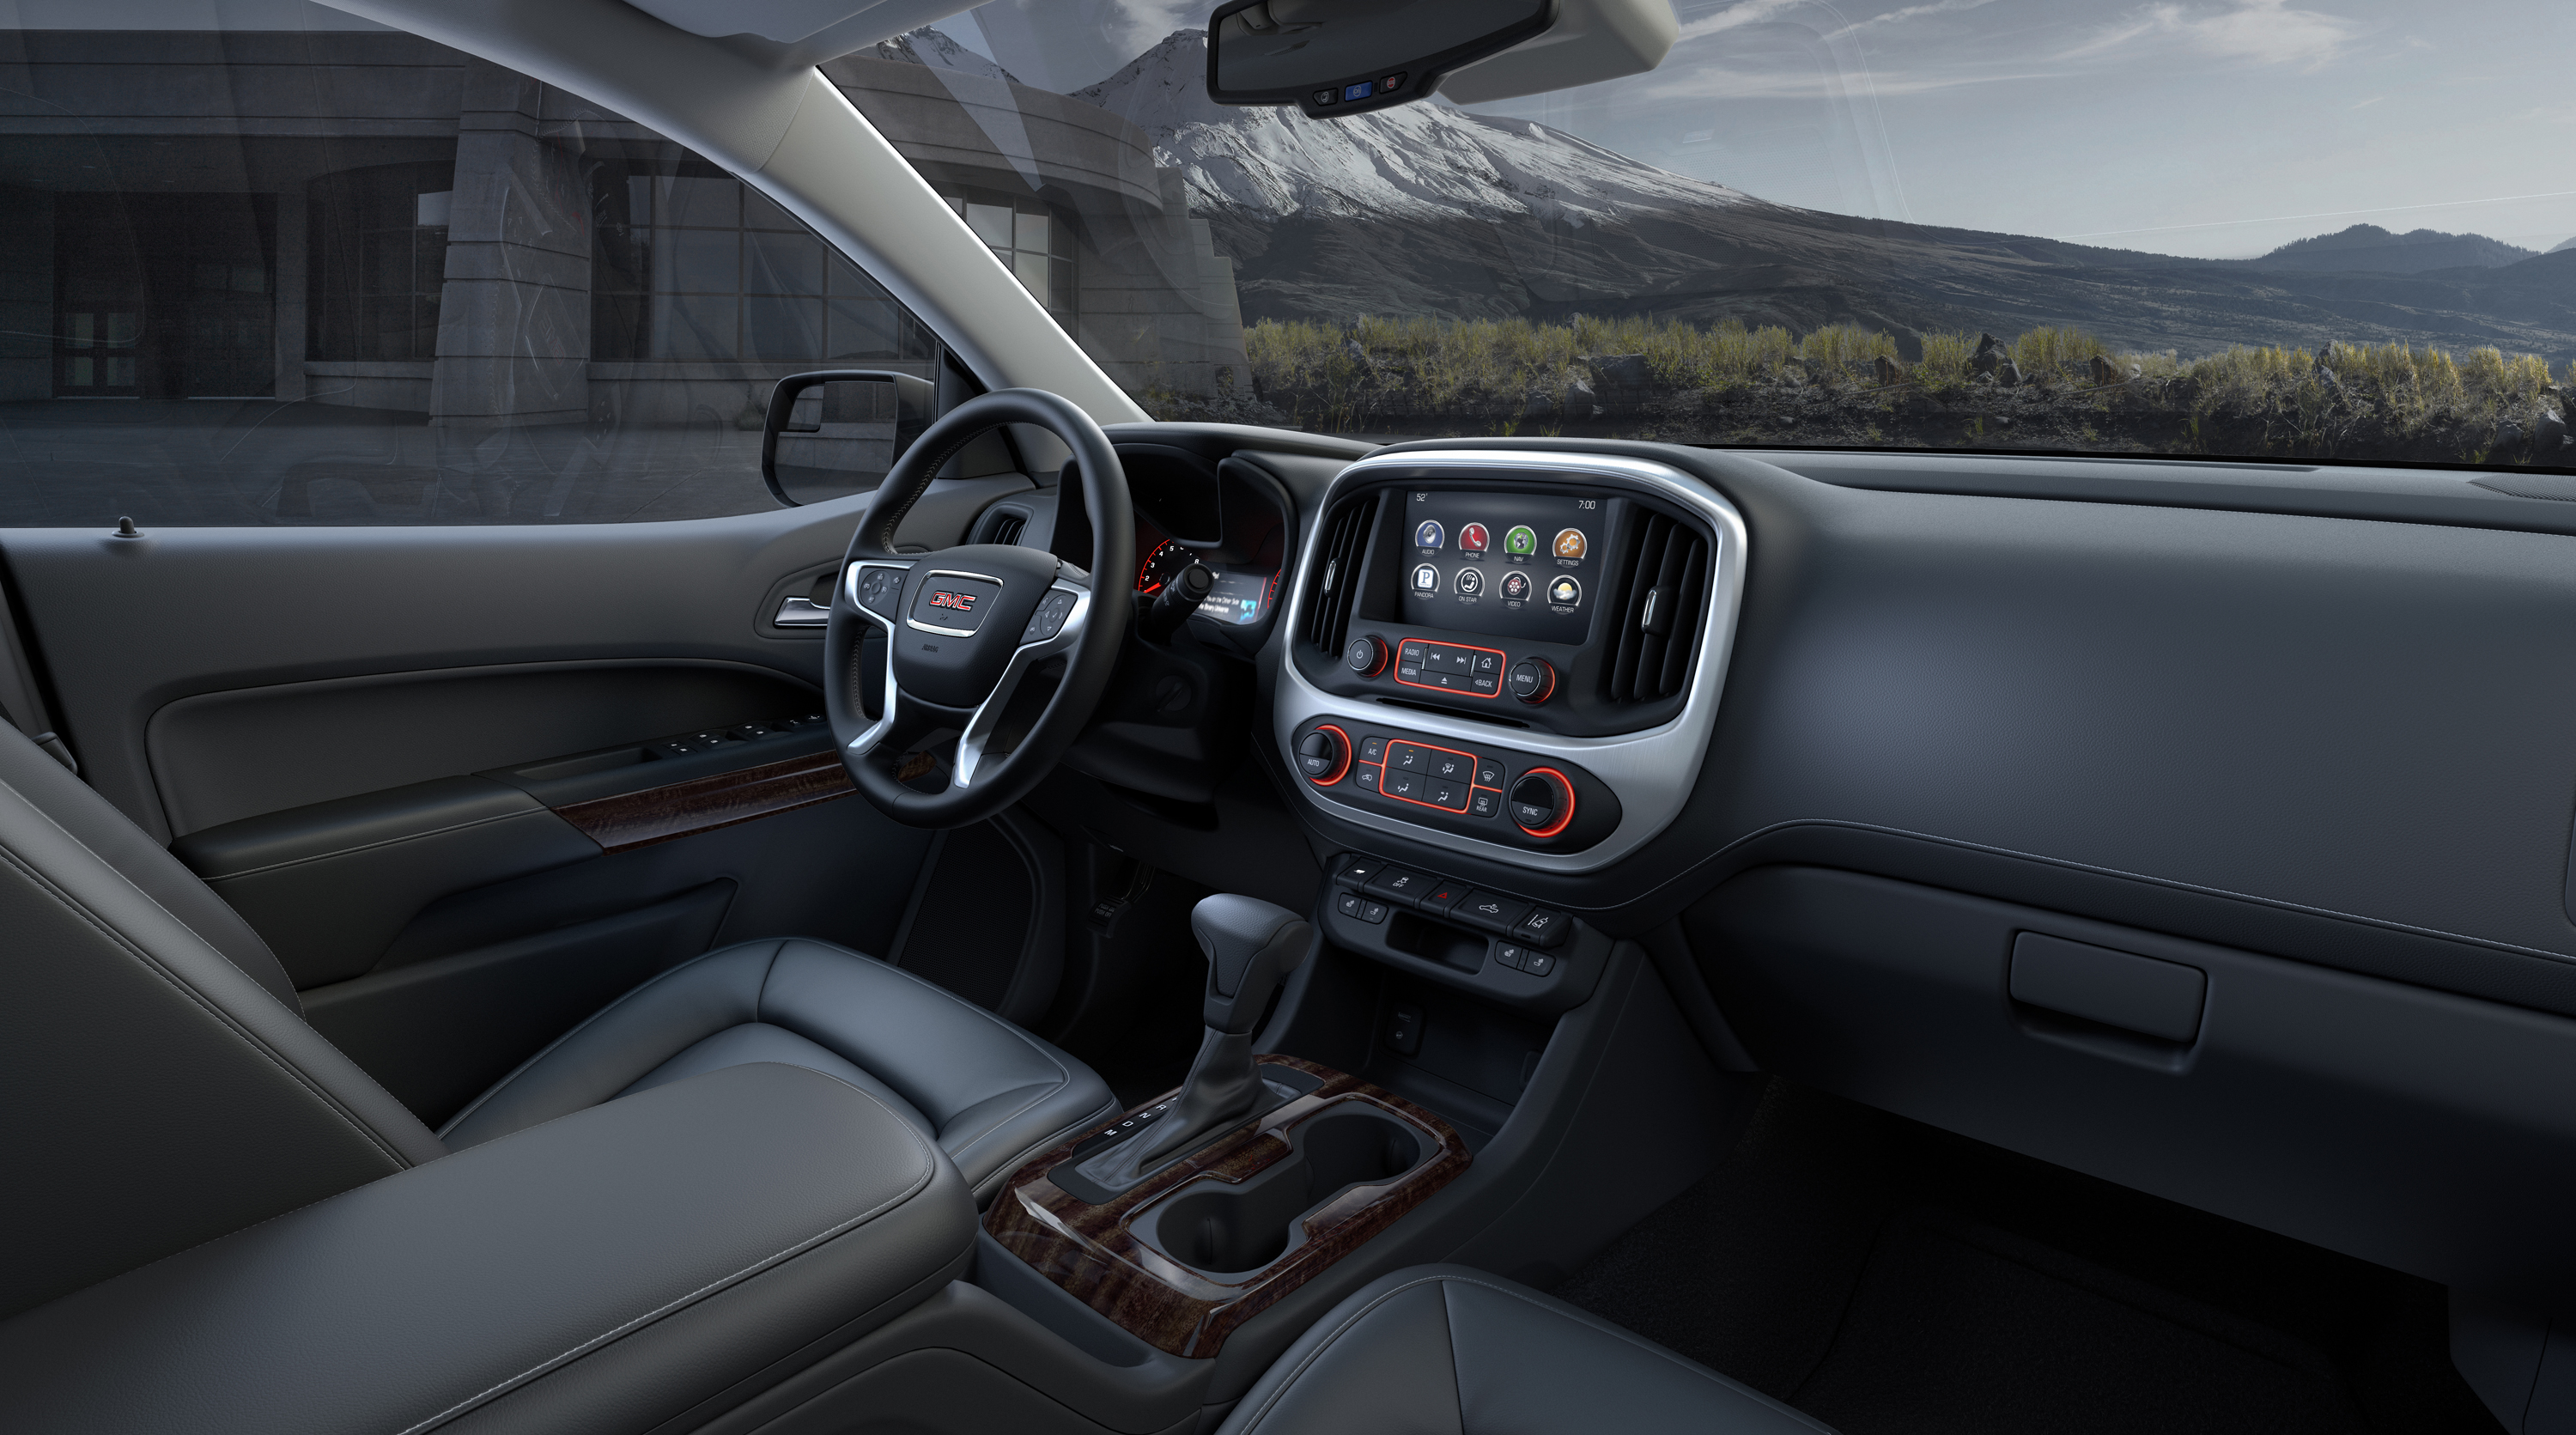 2015 GMC Canyon Interior Profile from Rear Seat - Motor Review